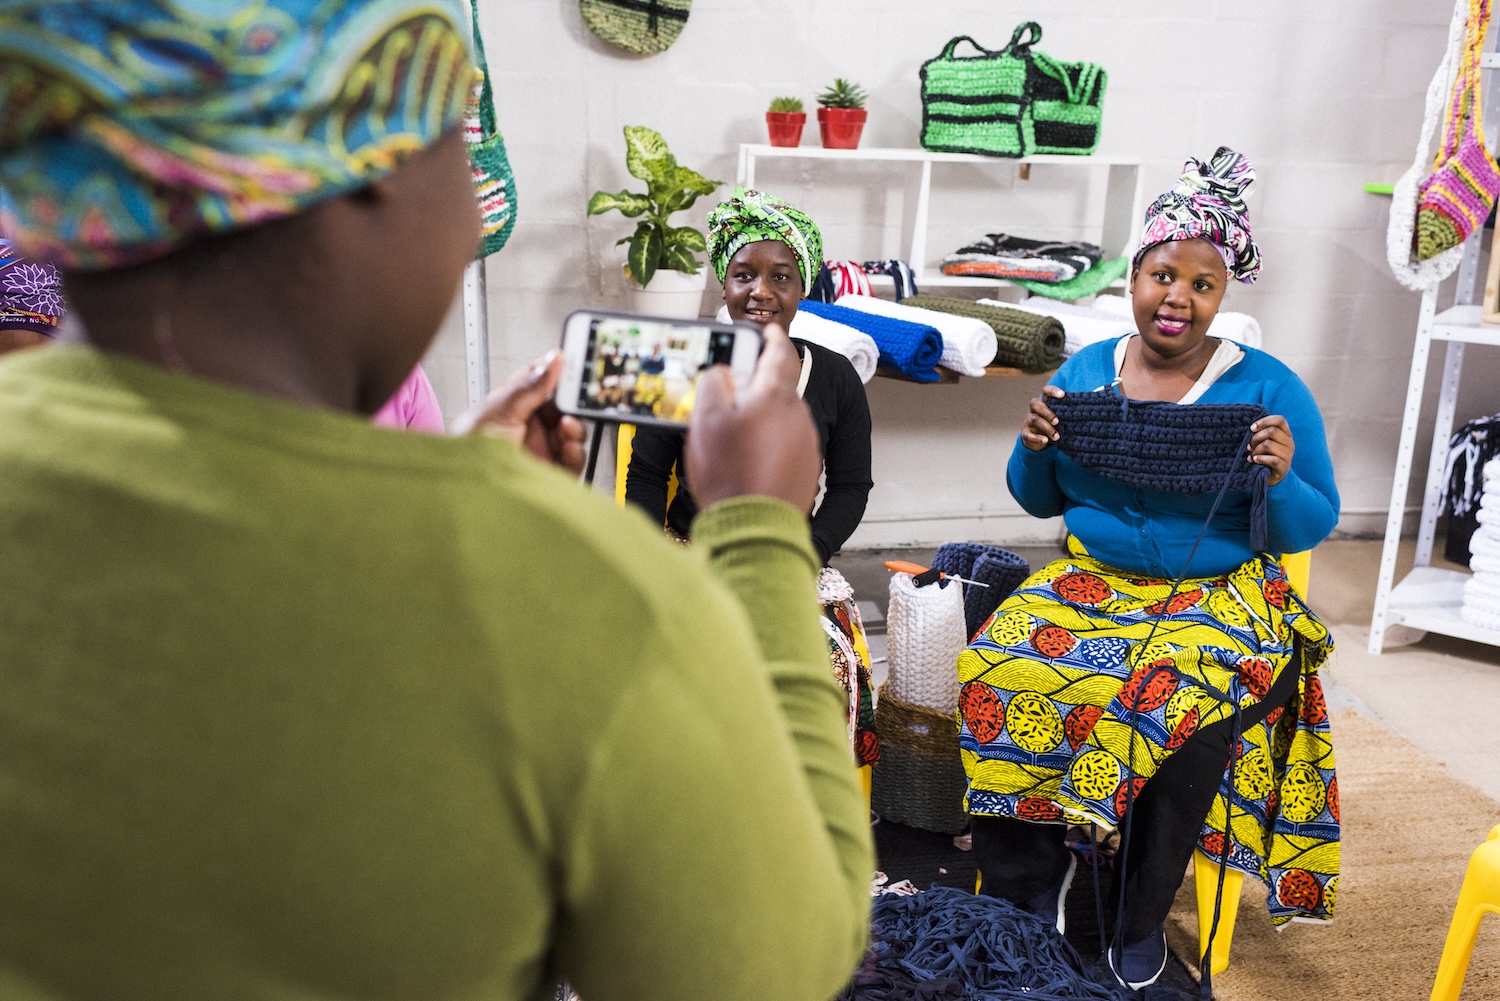 A photo of three South Africans in head coverings. One stands and takes a photo of the other two, who are seated and displaying their crocheting projects.